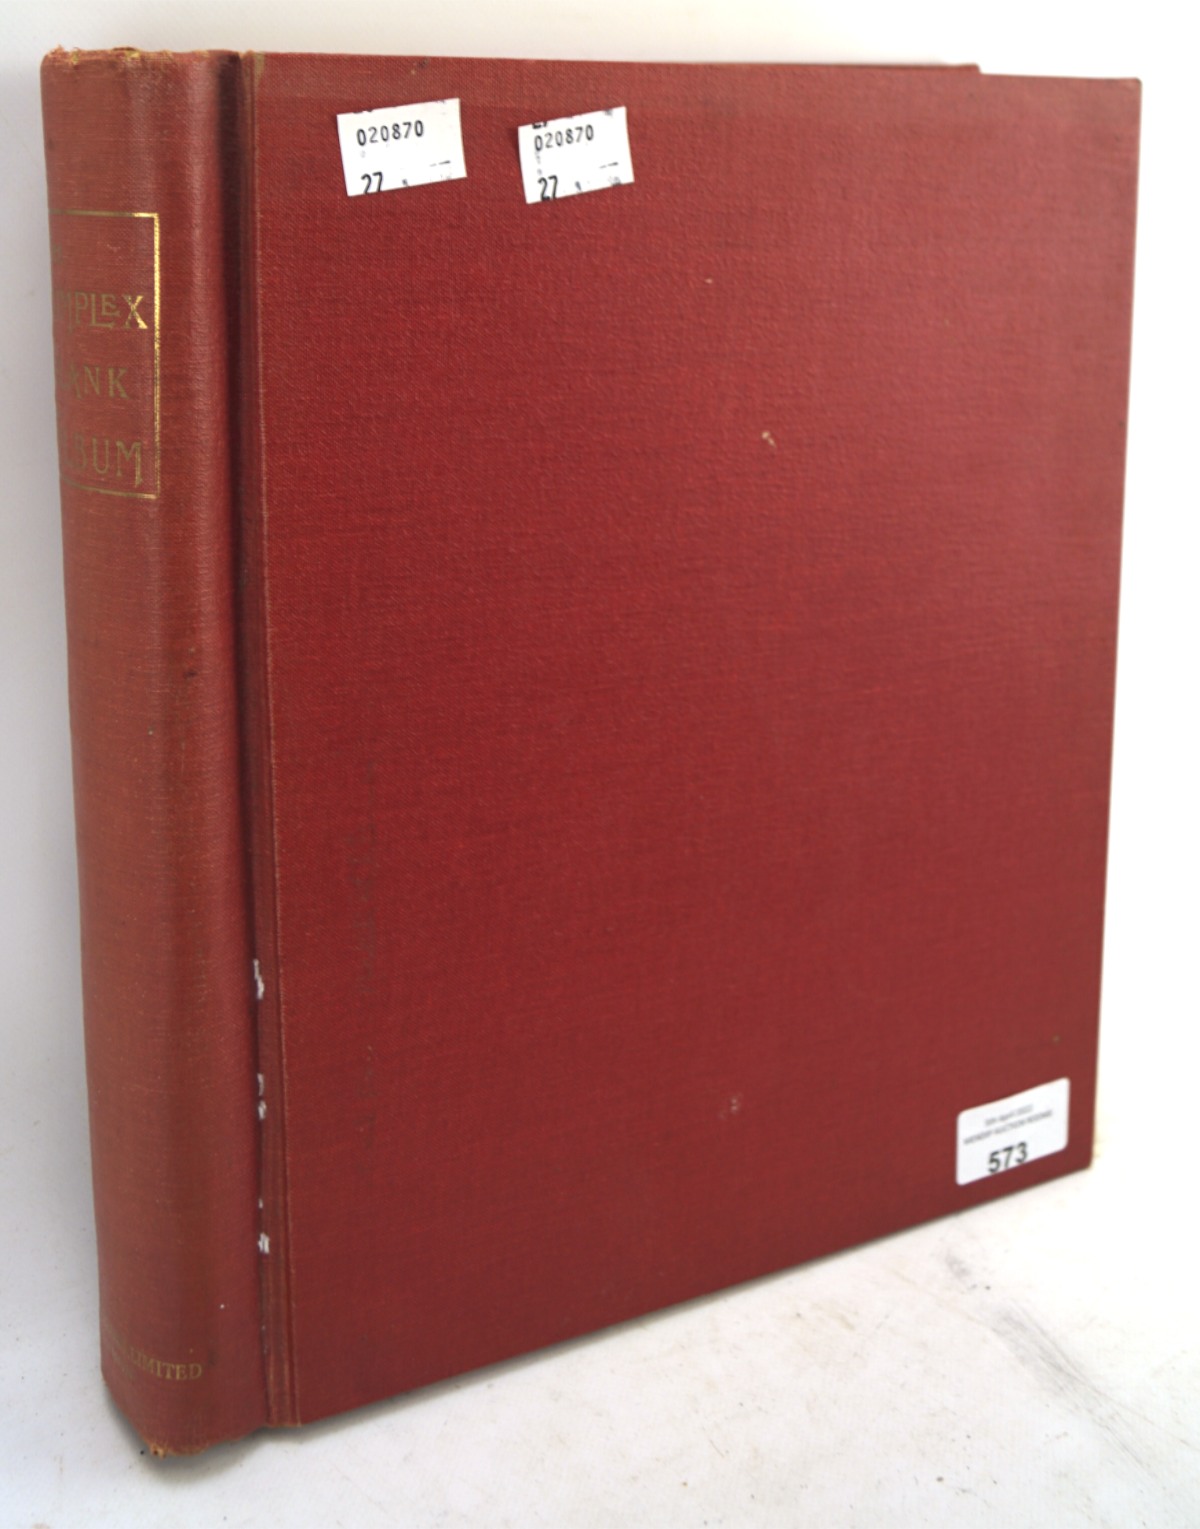 A Stanley Gibbons stamp album containing a collection of mostly GB stamps, Victorian and later,